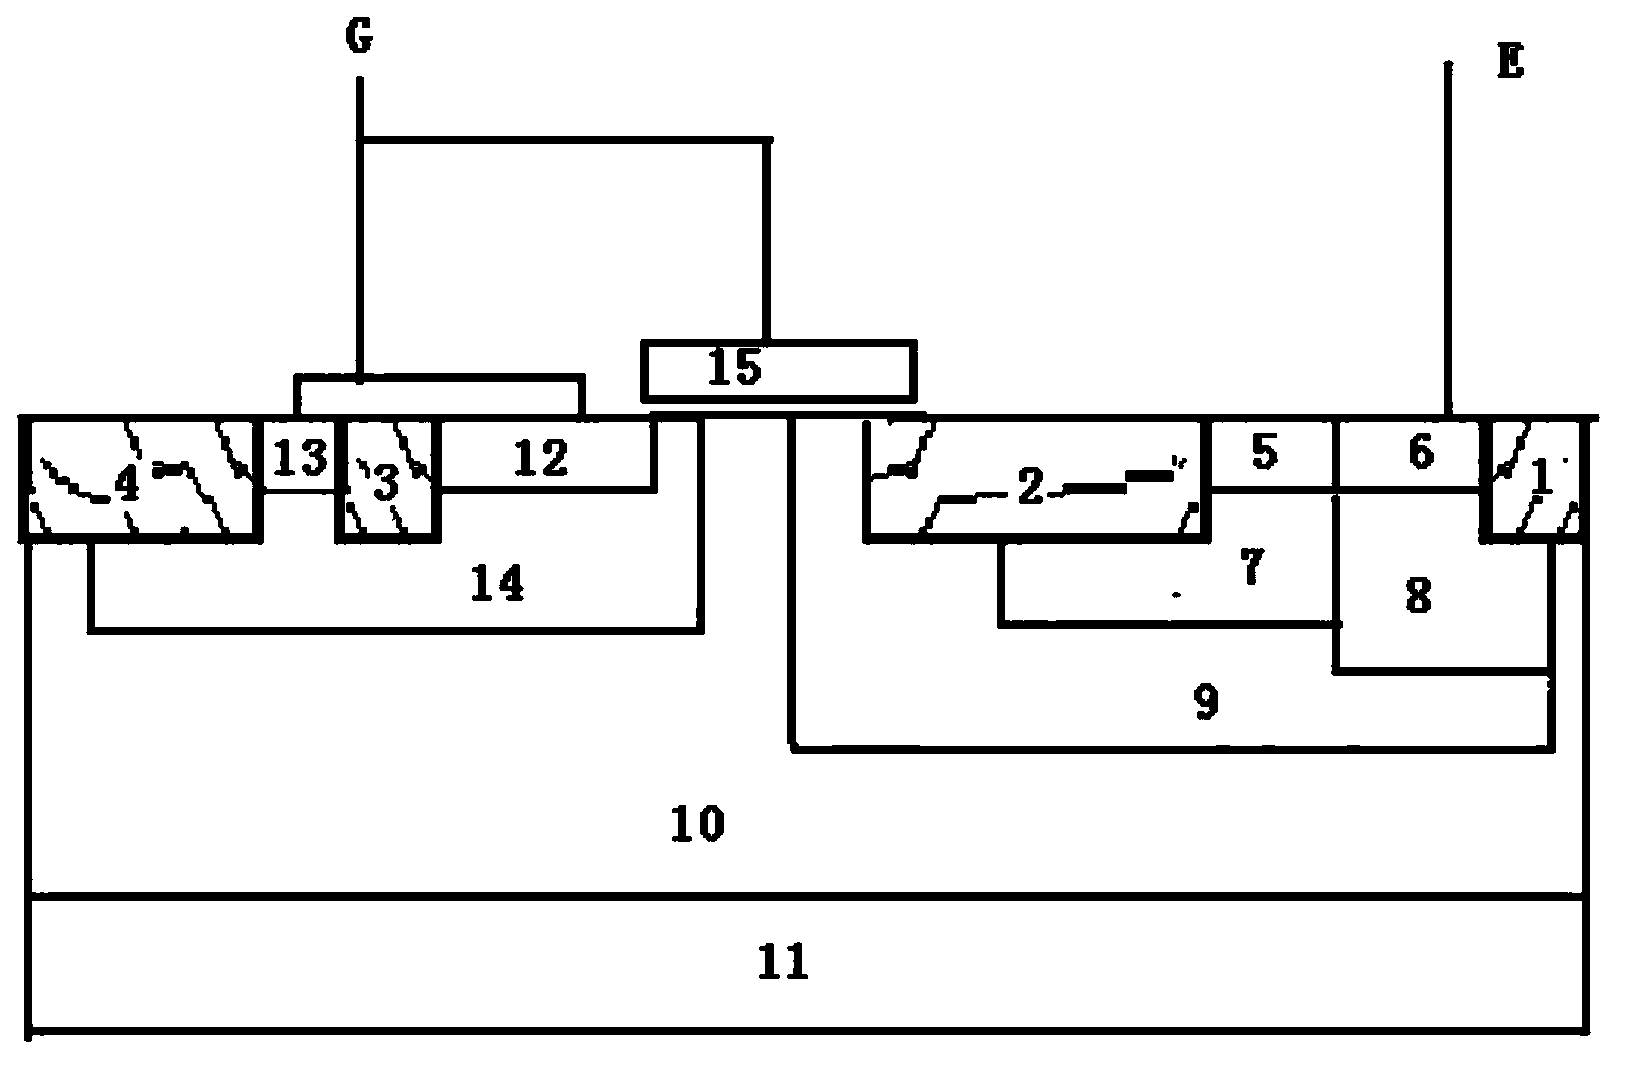 High-voltage static protection structure